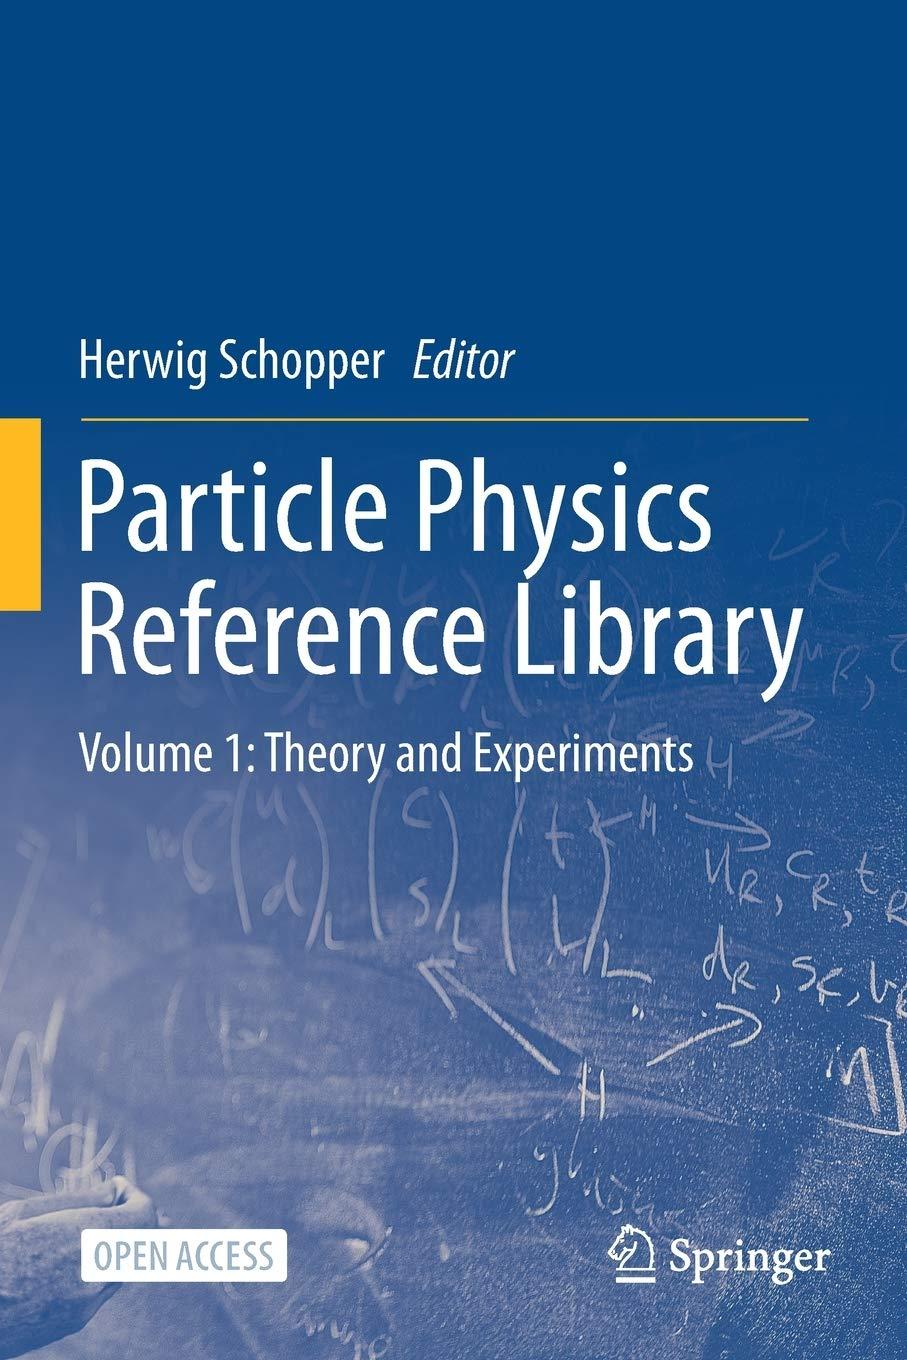 particle physics reference library volume 1 theory and experiments 1st edition herwig schopper 3030382095,